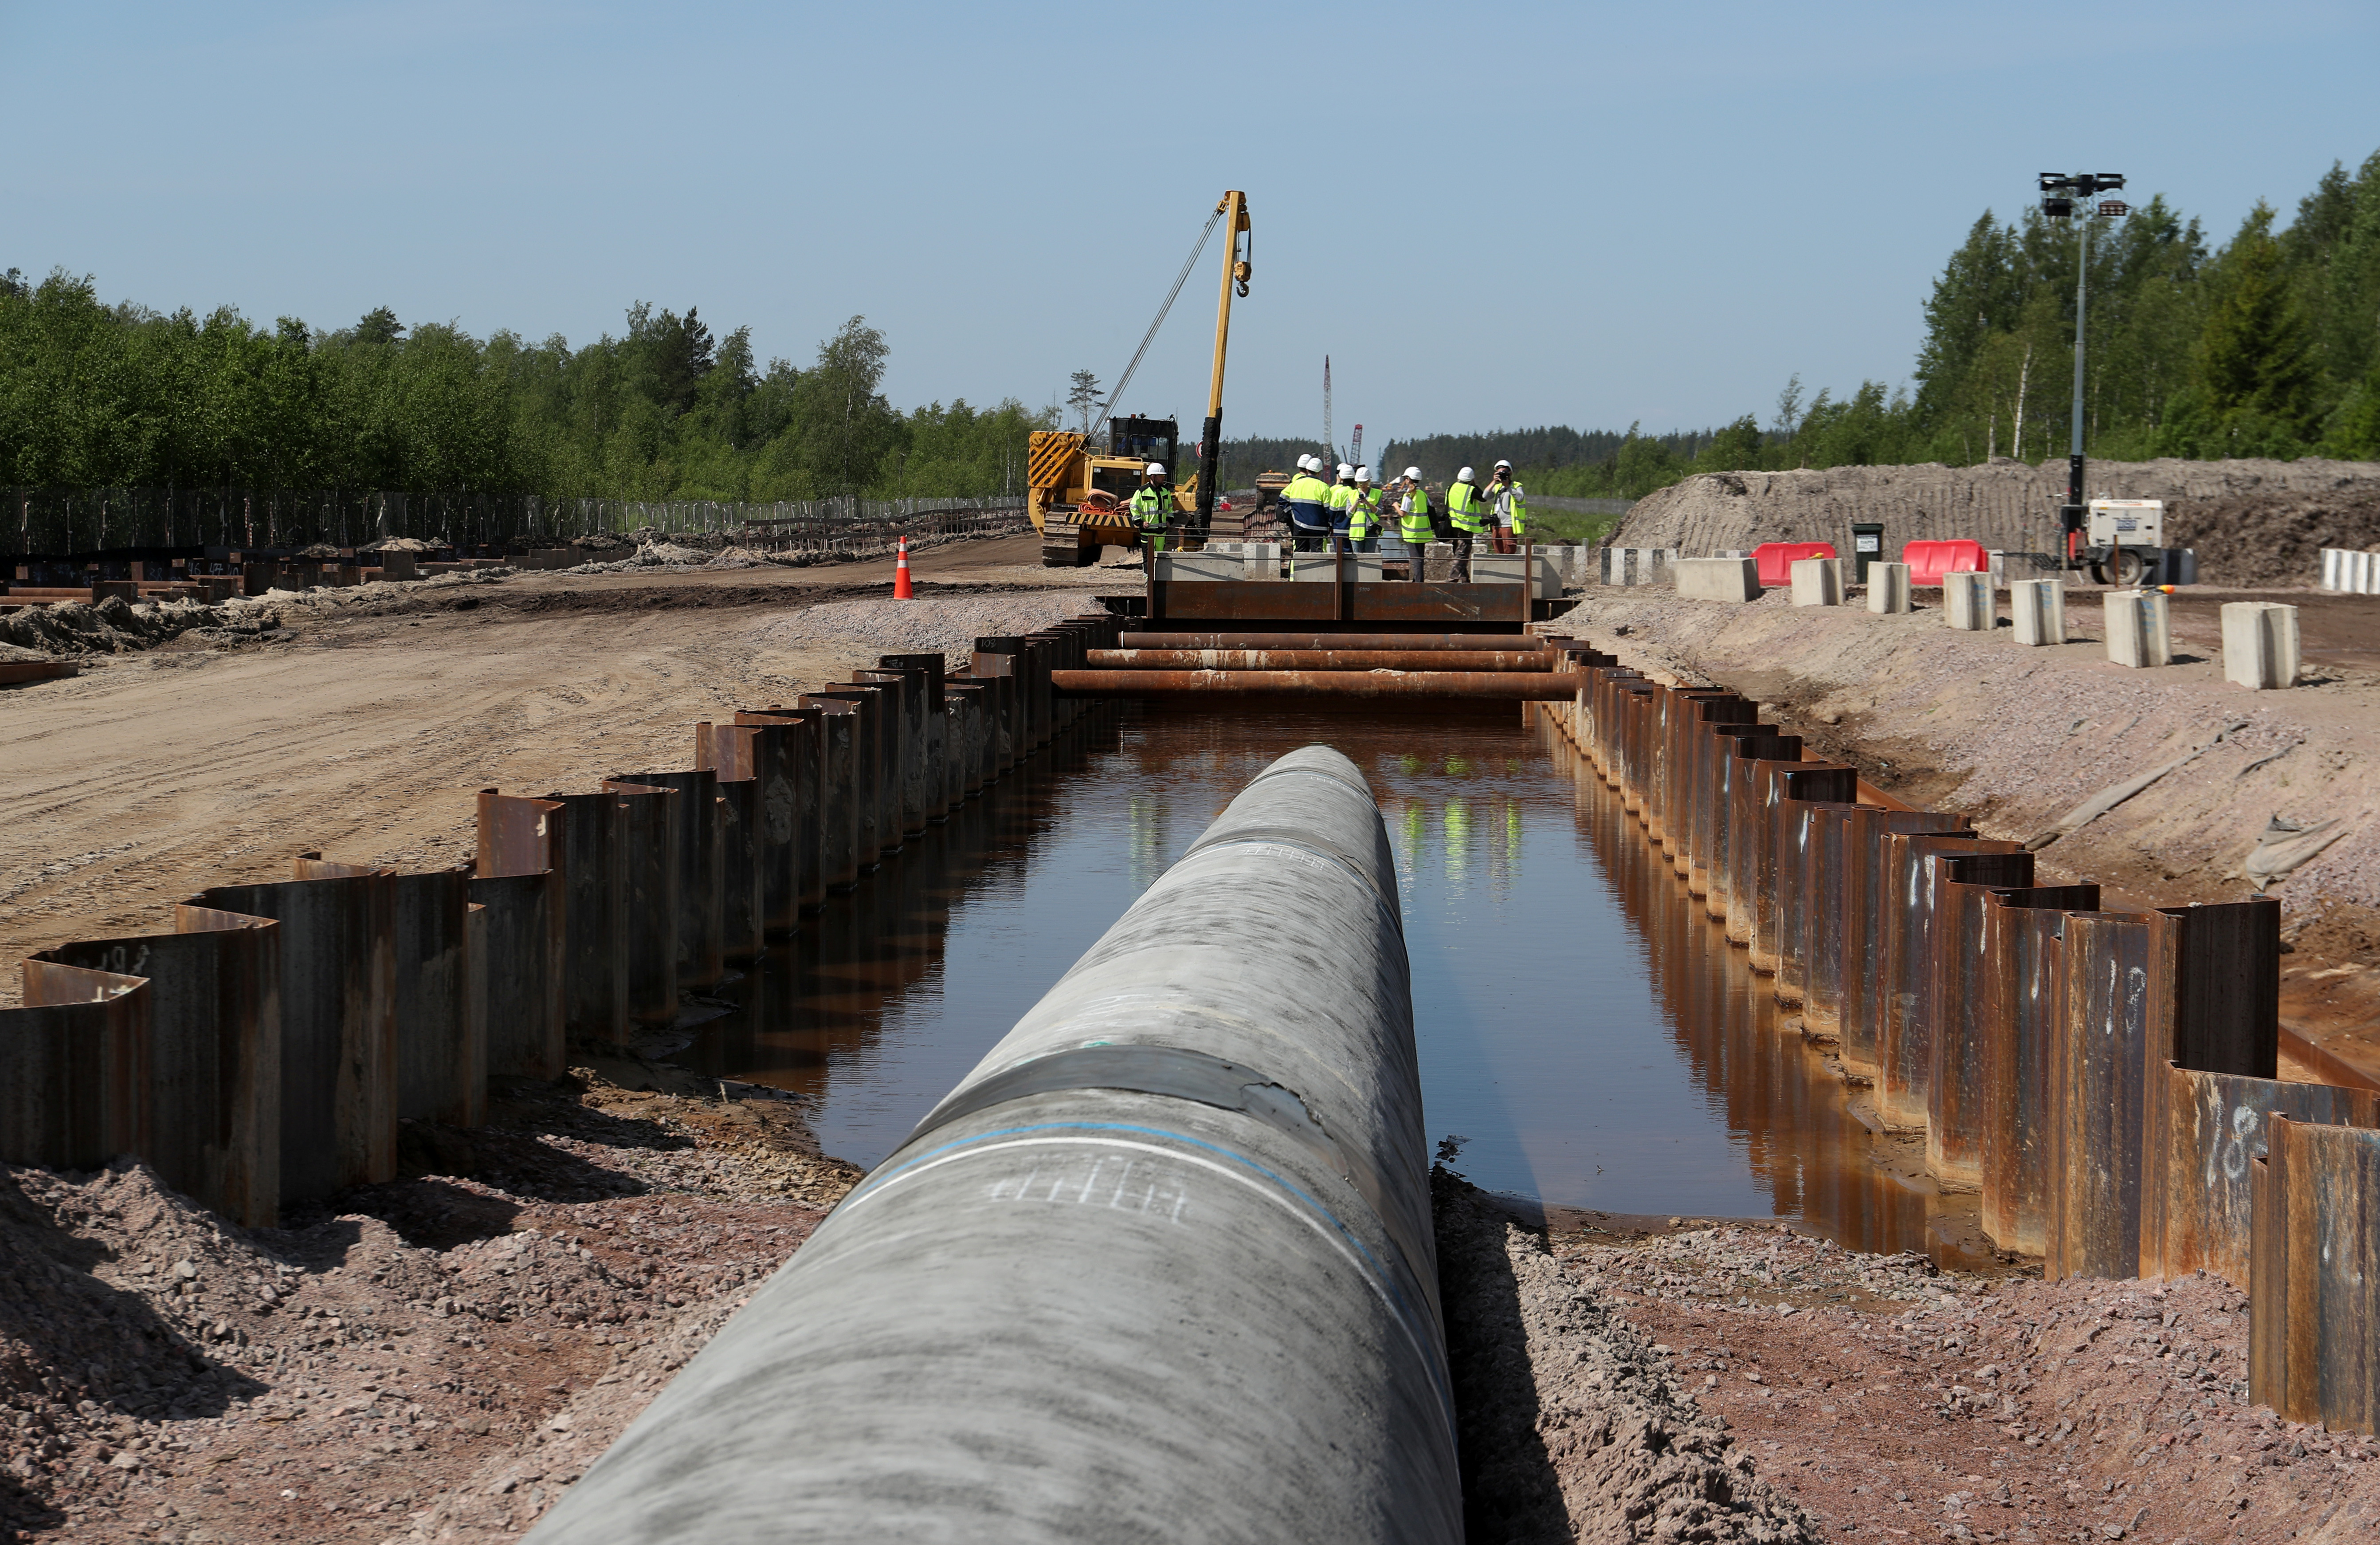 The construction site of the Nord Stream 2 gas pipeline in Russia